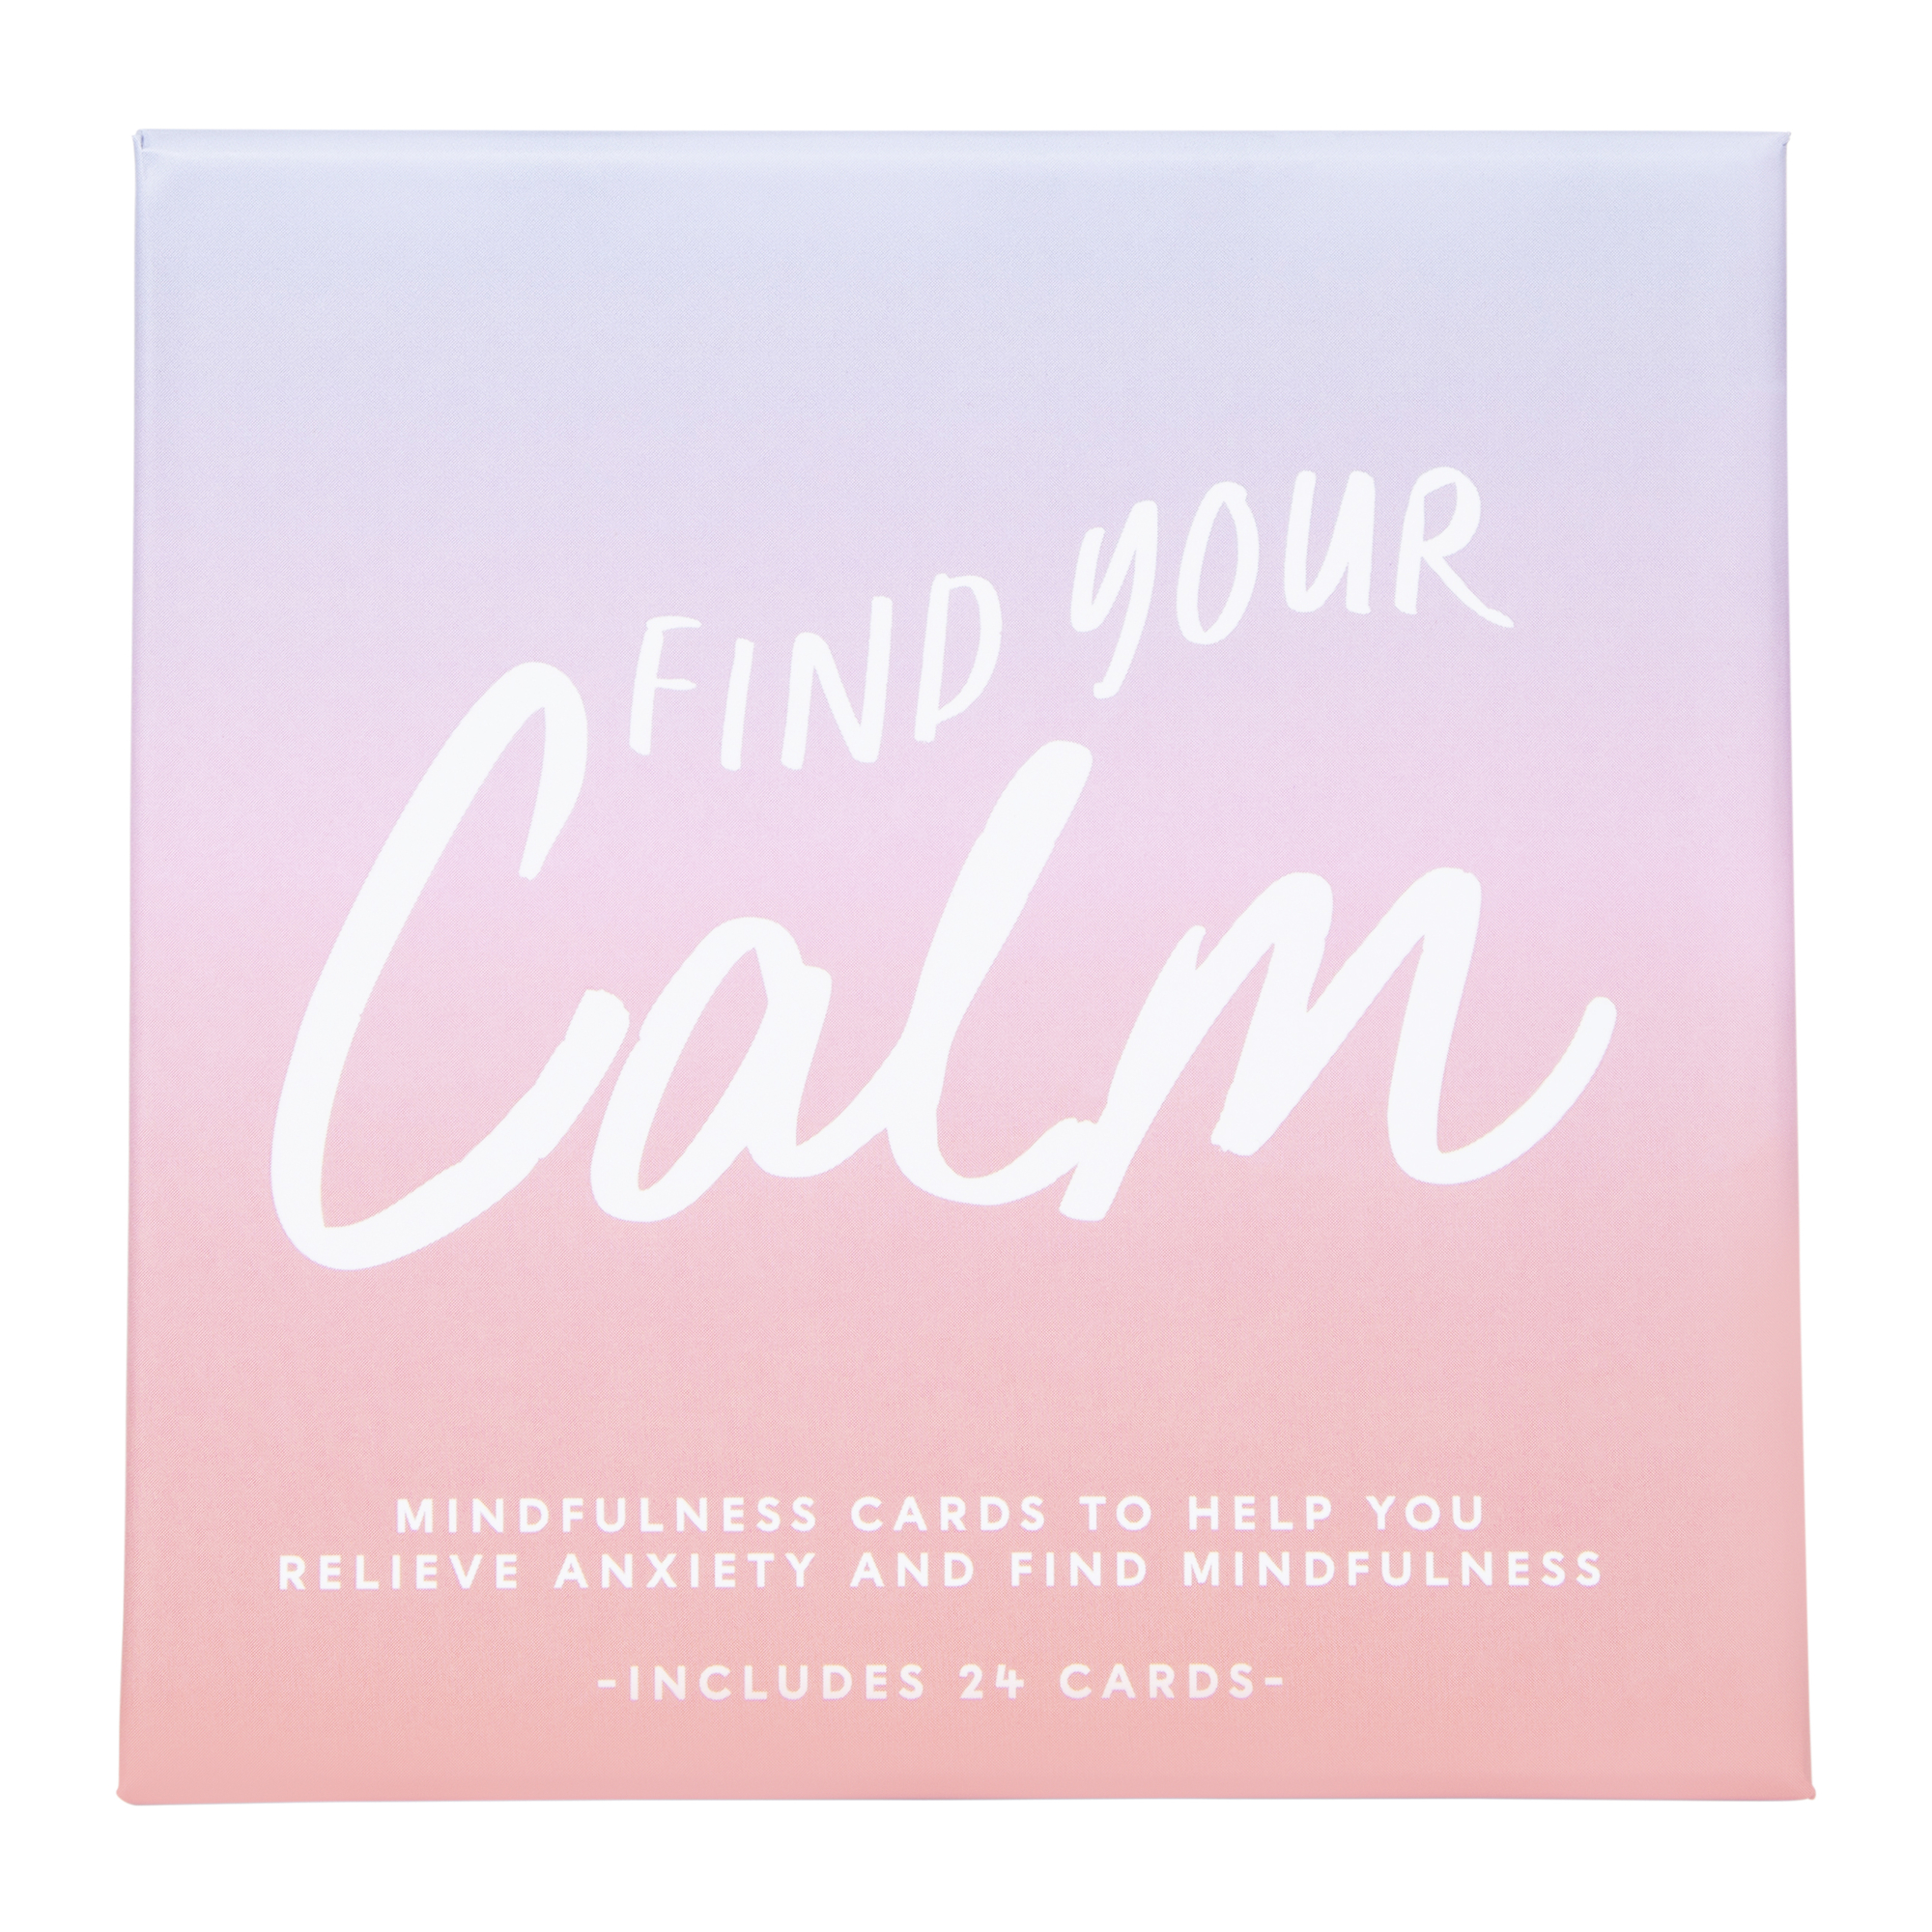 'find your calm' mindfulness cards deck